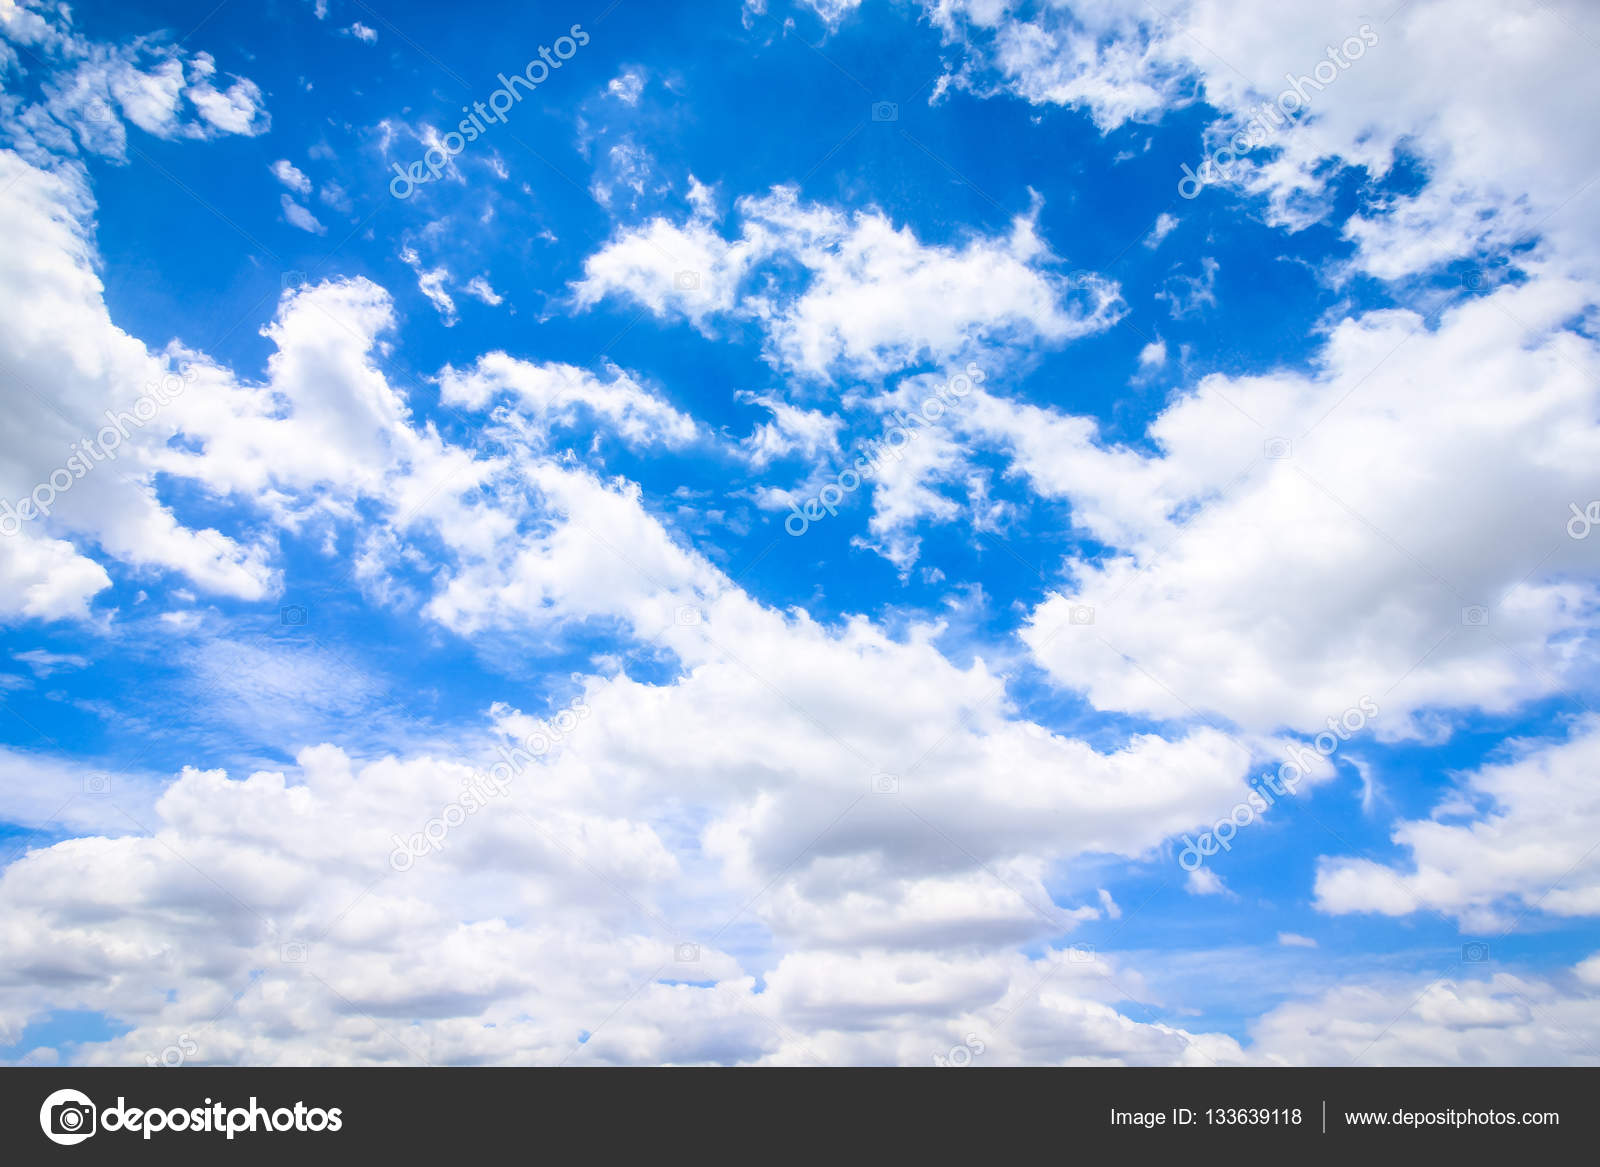 Clear Blue Sky With Clouds Wallpaper